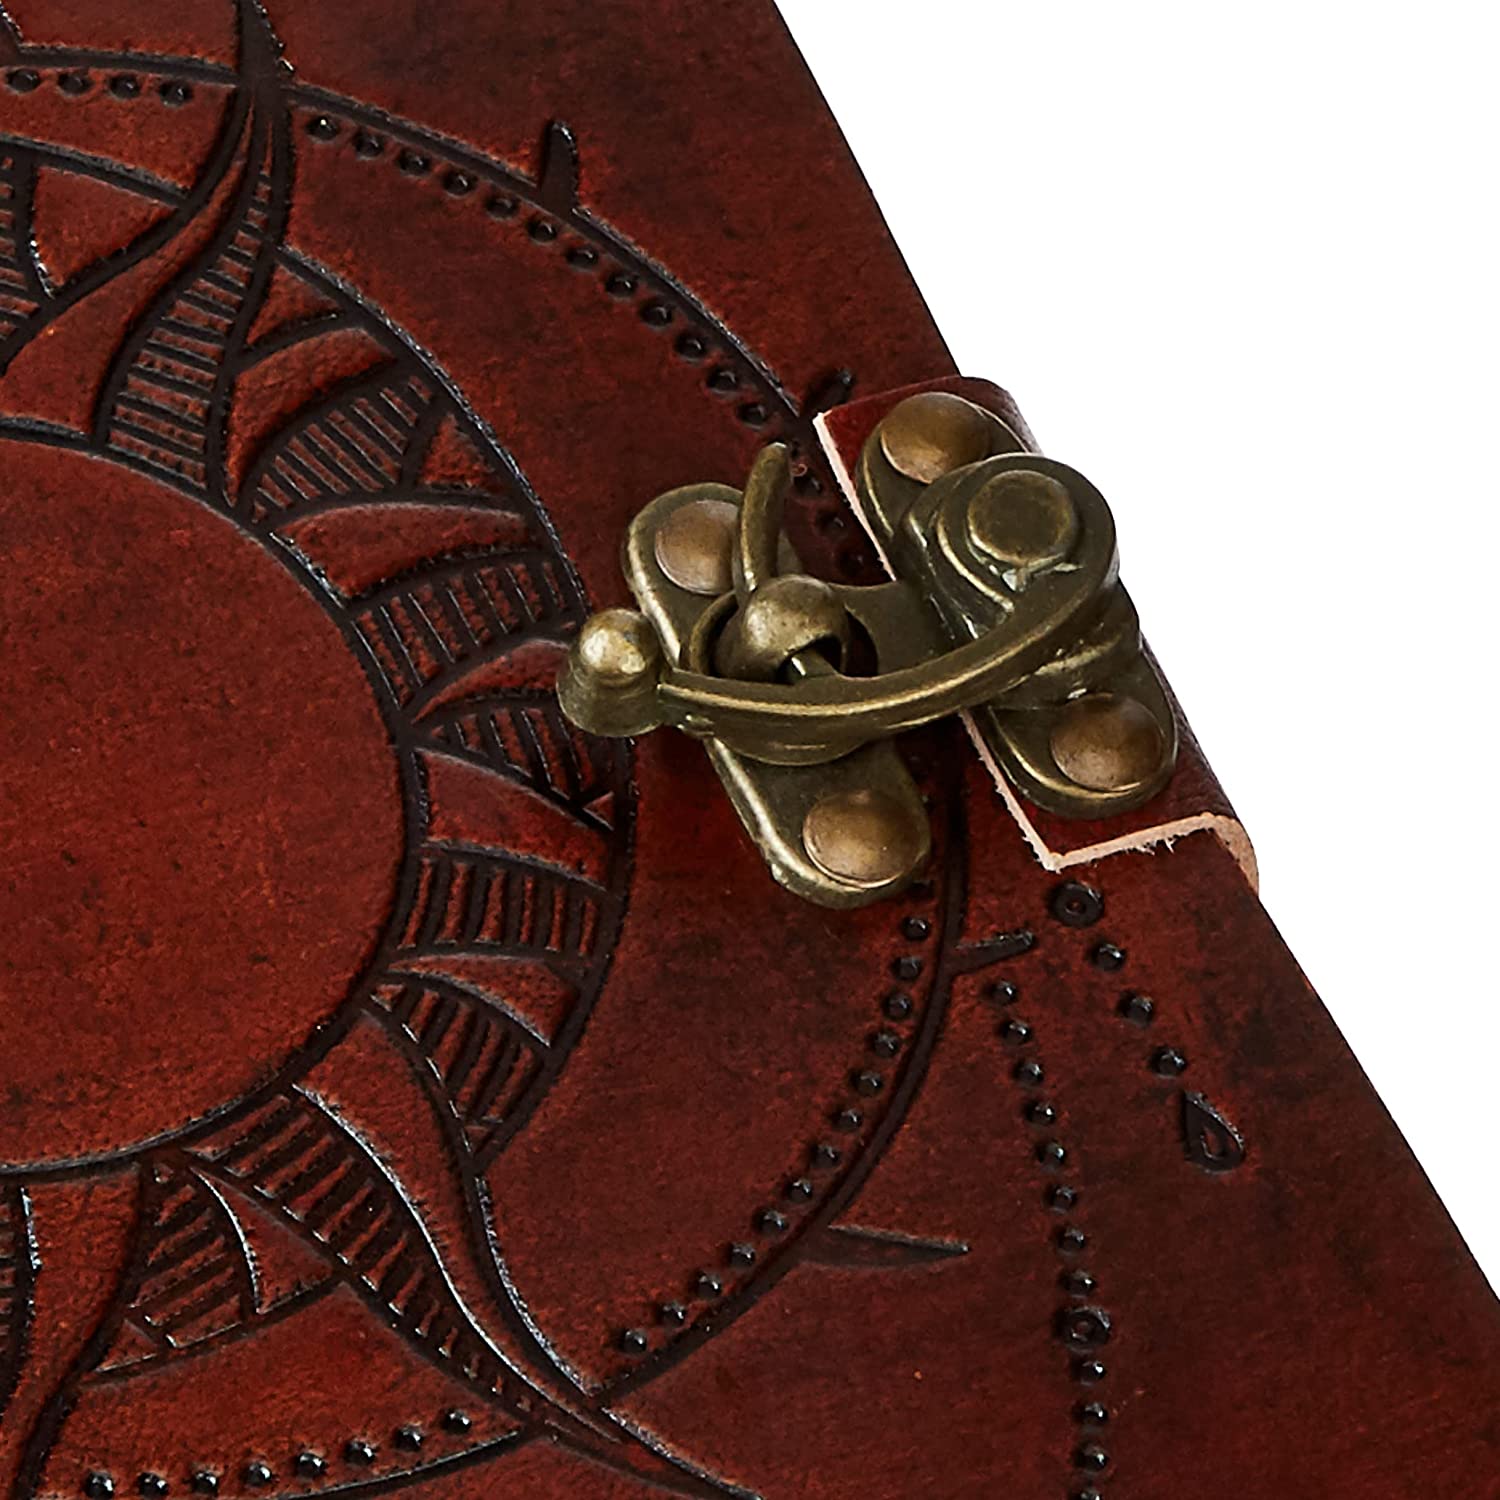 Handcrafted Antique Leather Journal with Embossed Sun & Moon Design with a Vintage Lock